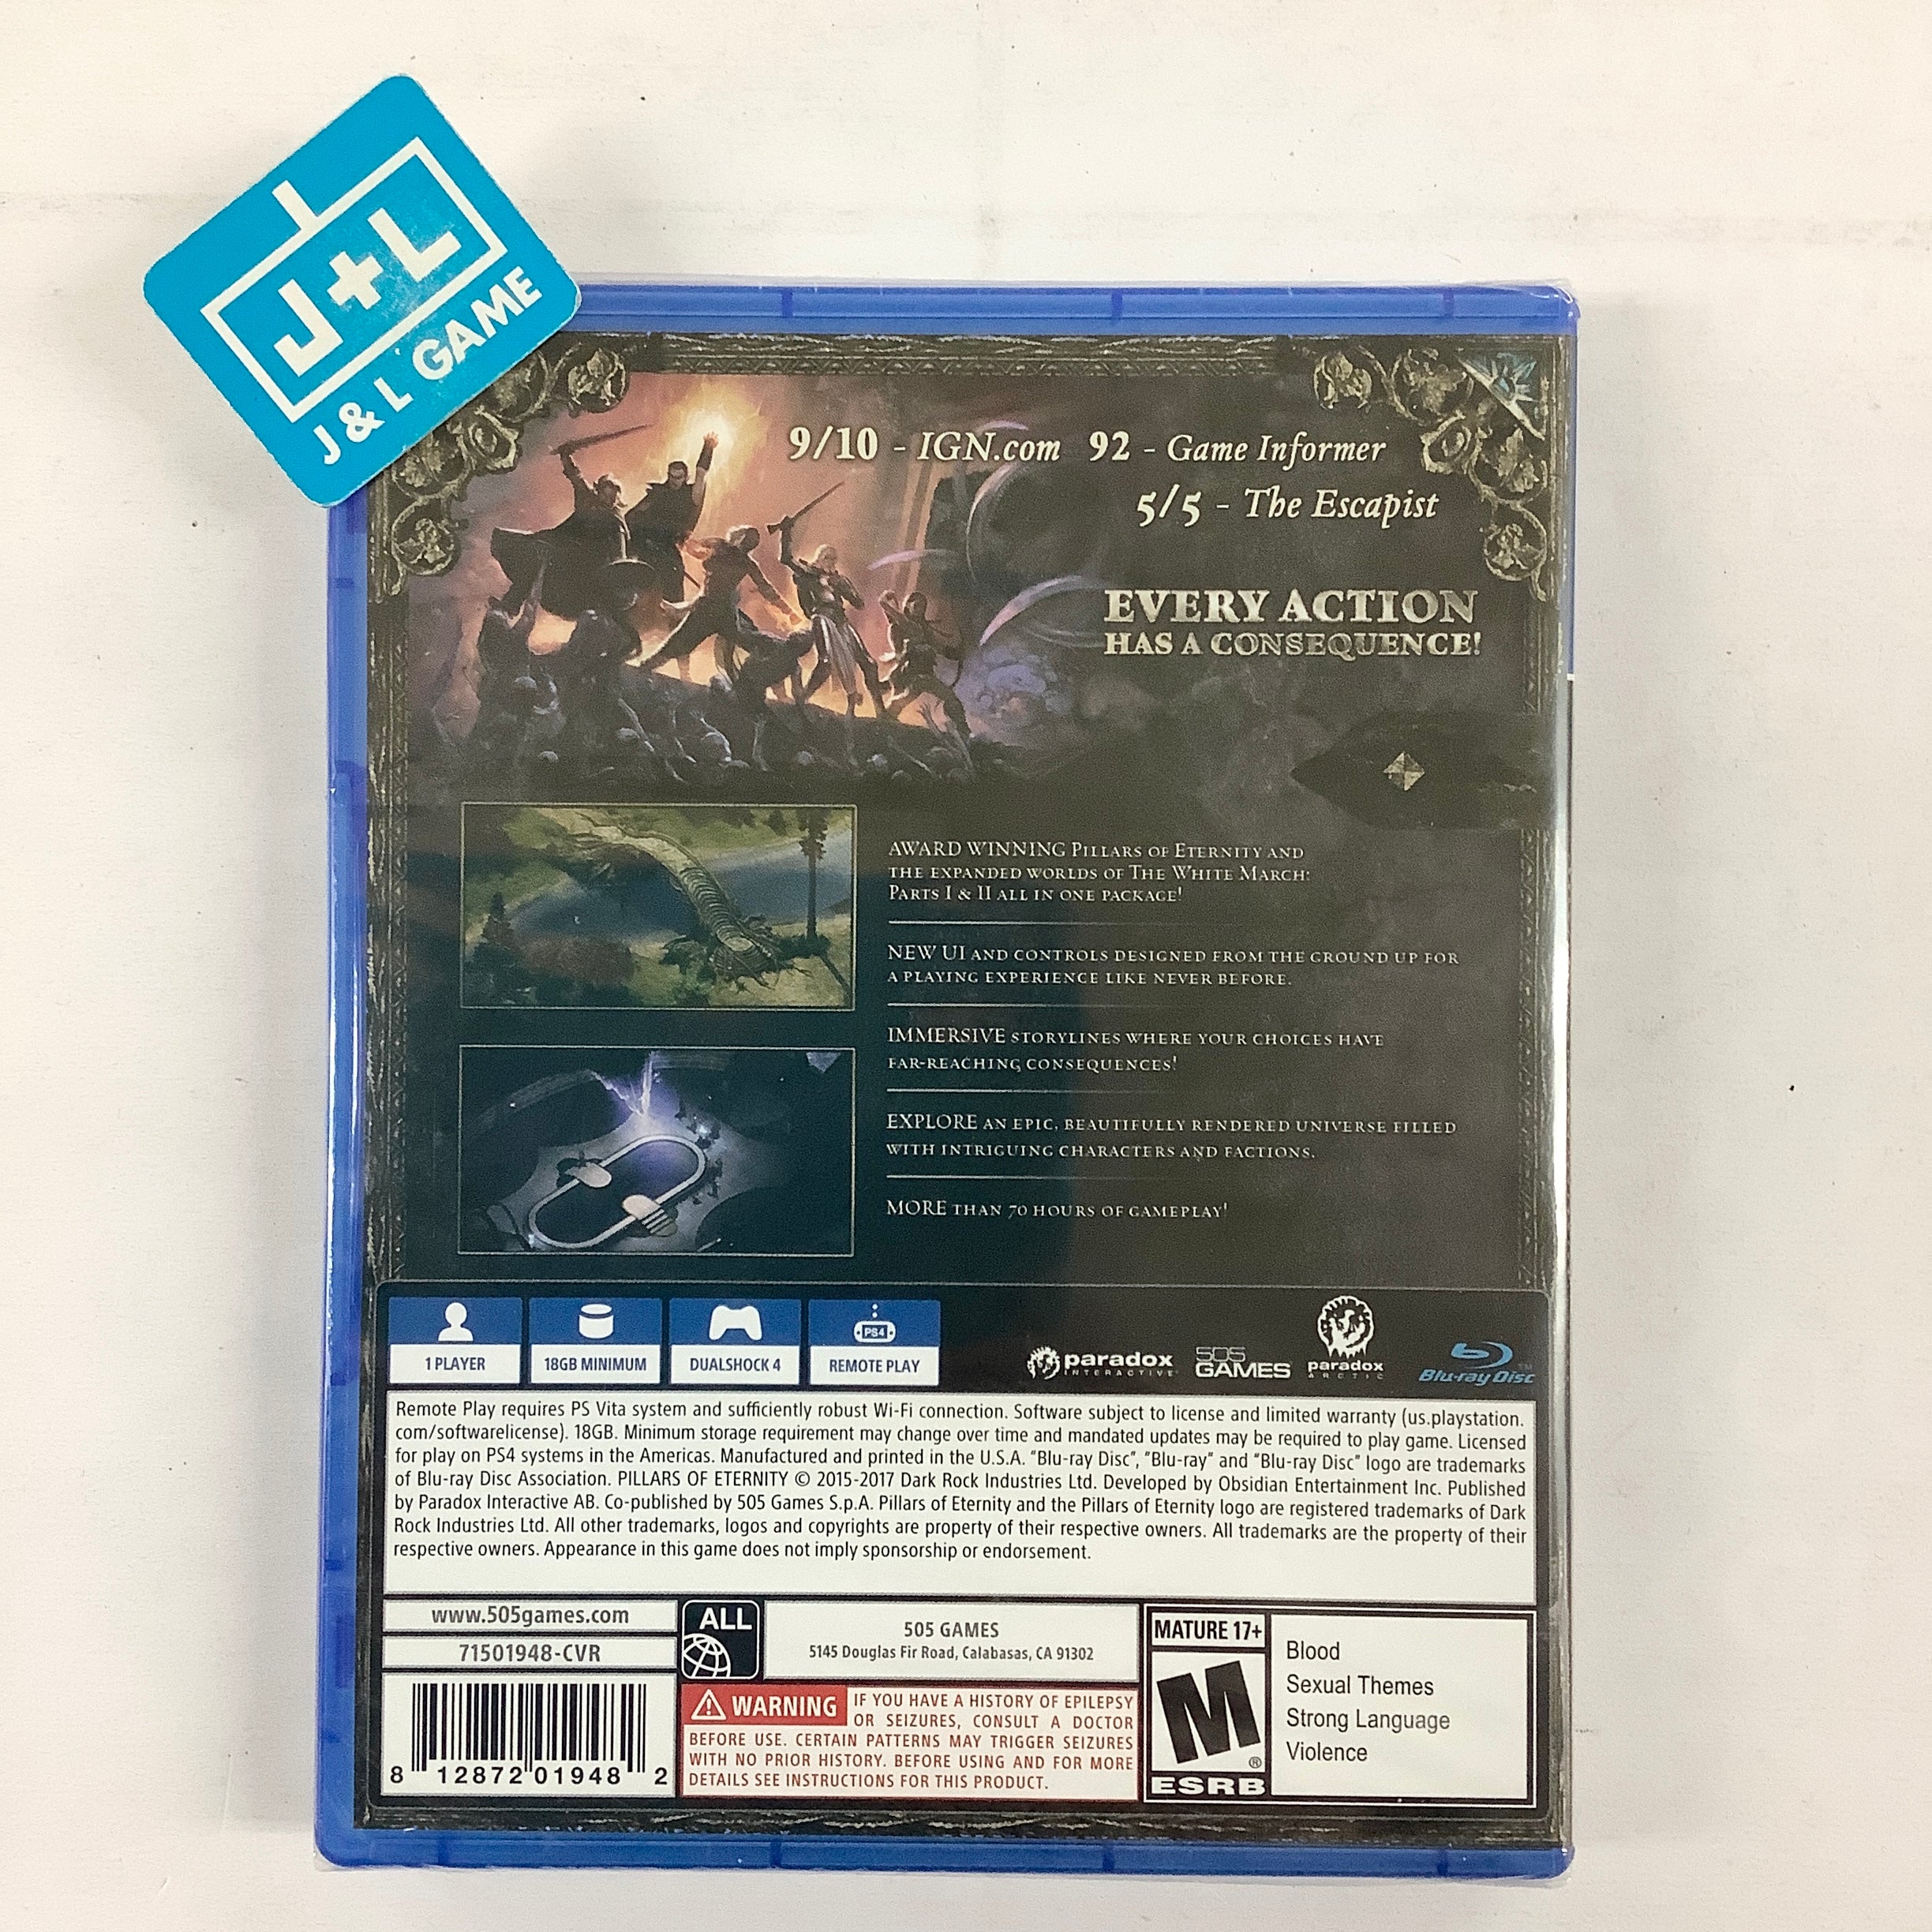 Pillars of Eternity: Complete Edition - (PS4) PlayStation 4 Video Games Paradox Interactive   